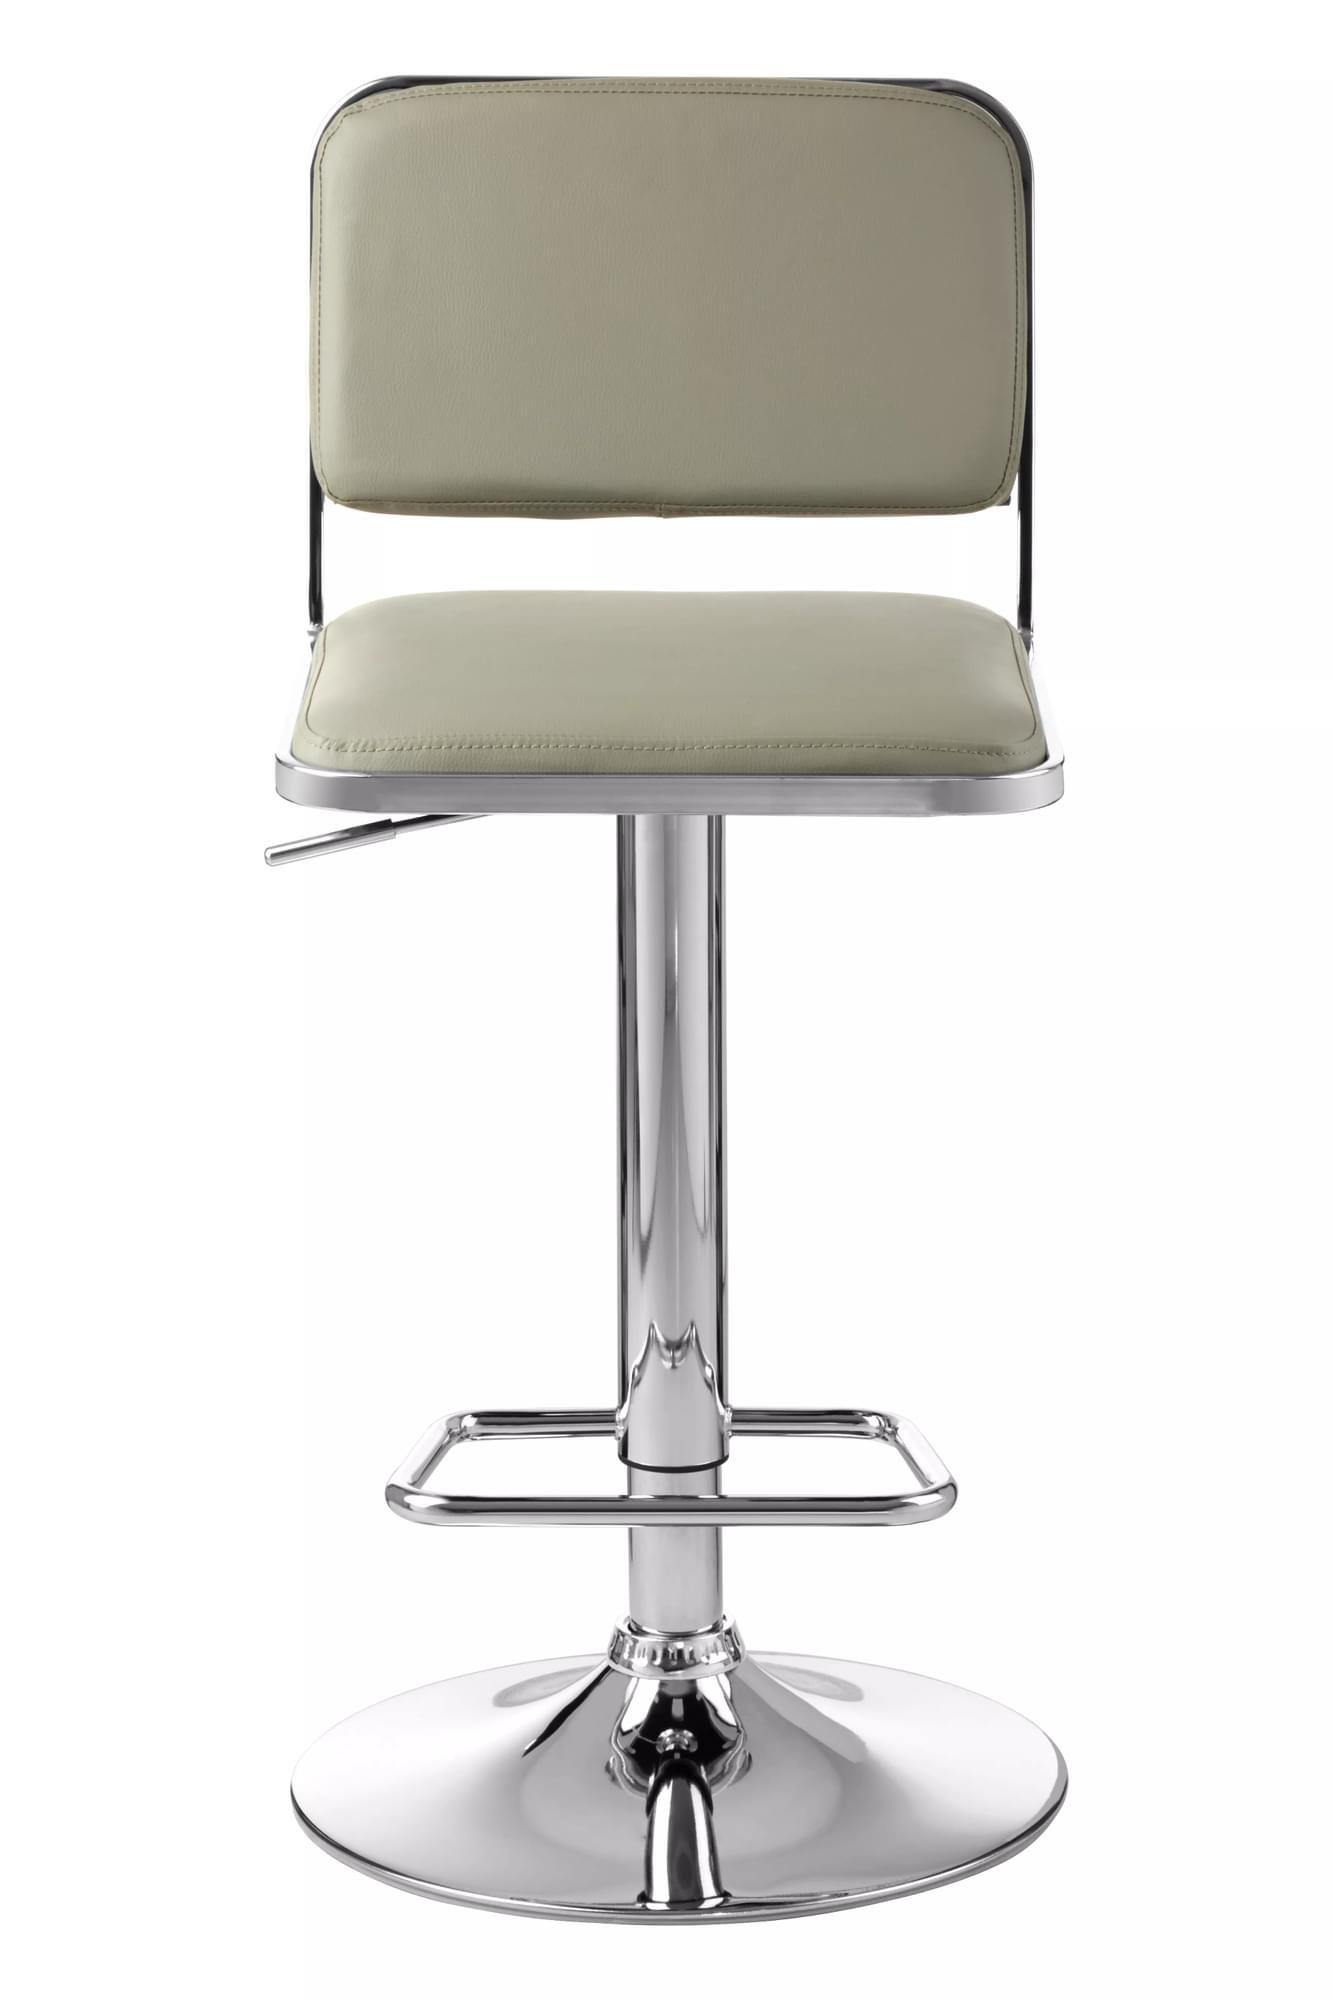 Interiors by Premier Light Grey Seat and Chrome Base Bar Stool, Adjustable Height Kitchen Bar Stool,